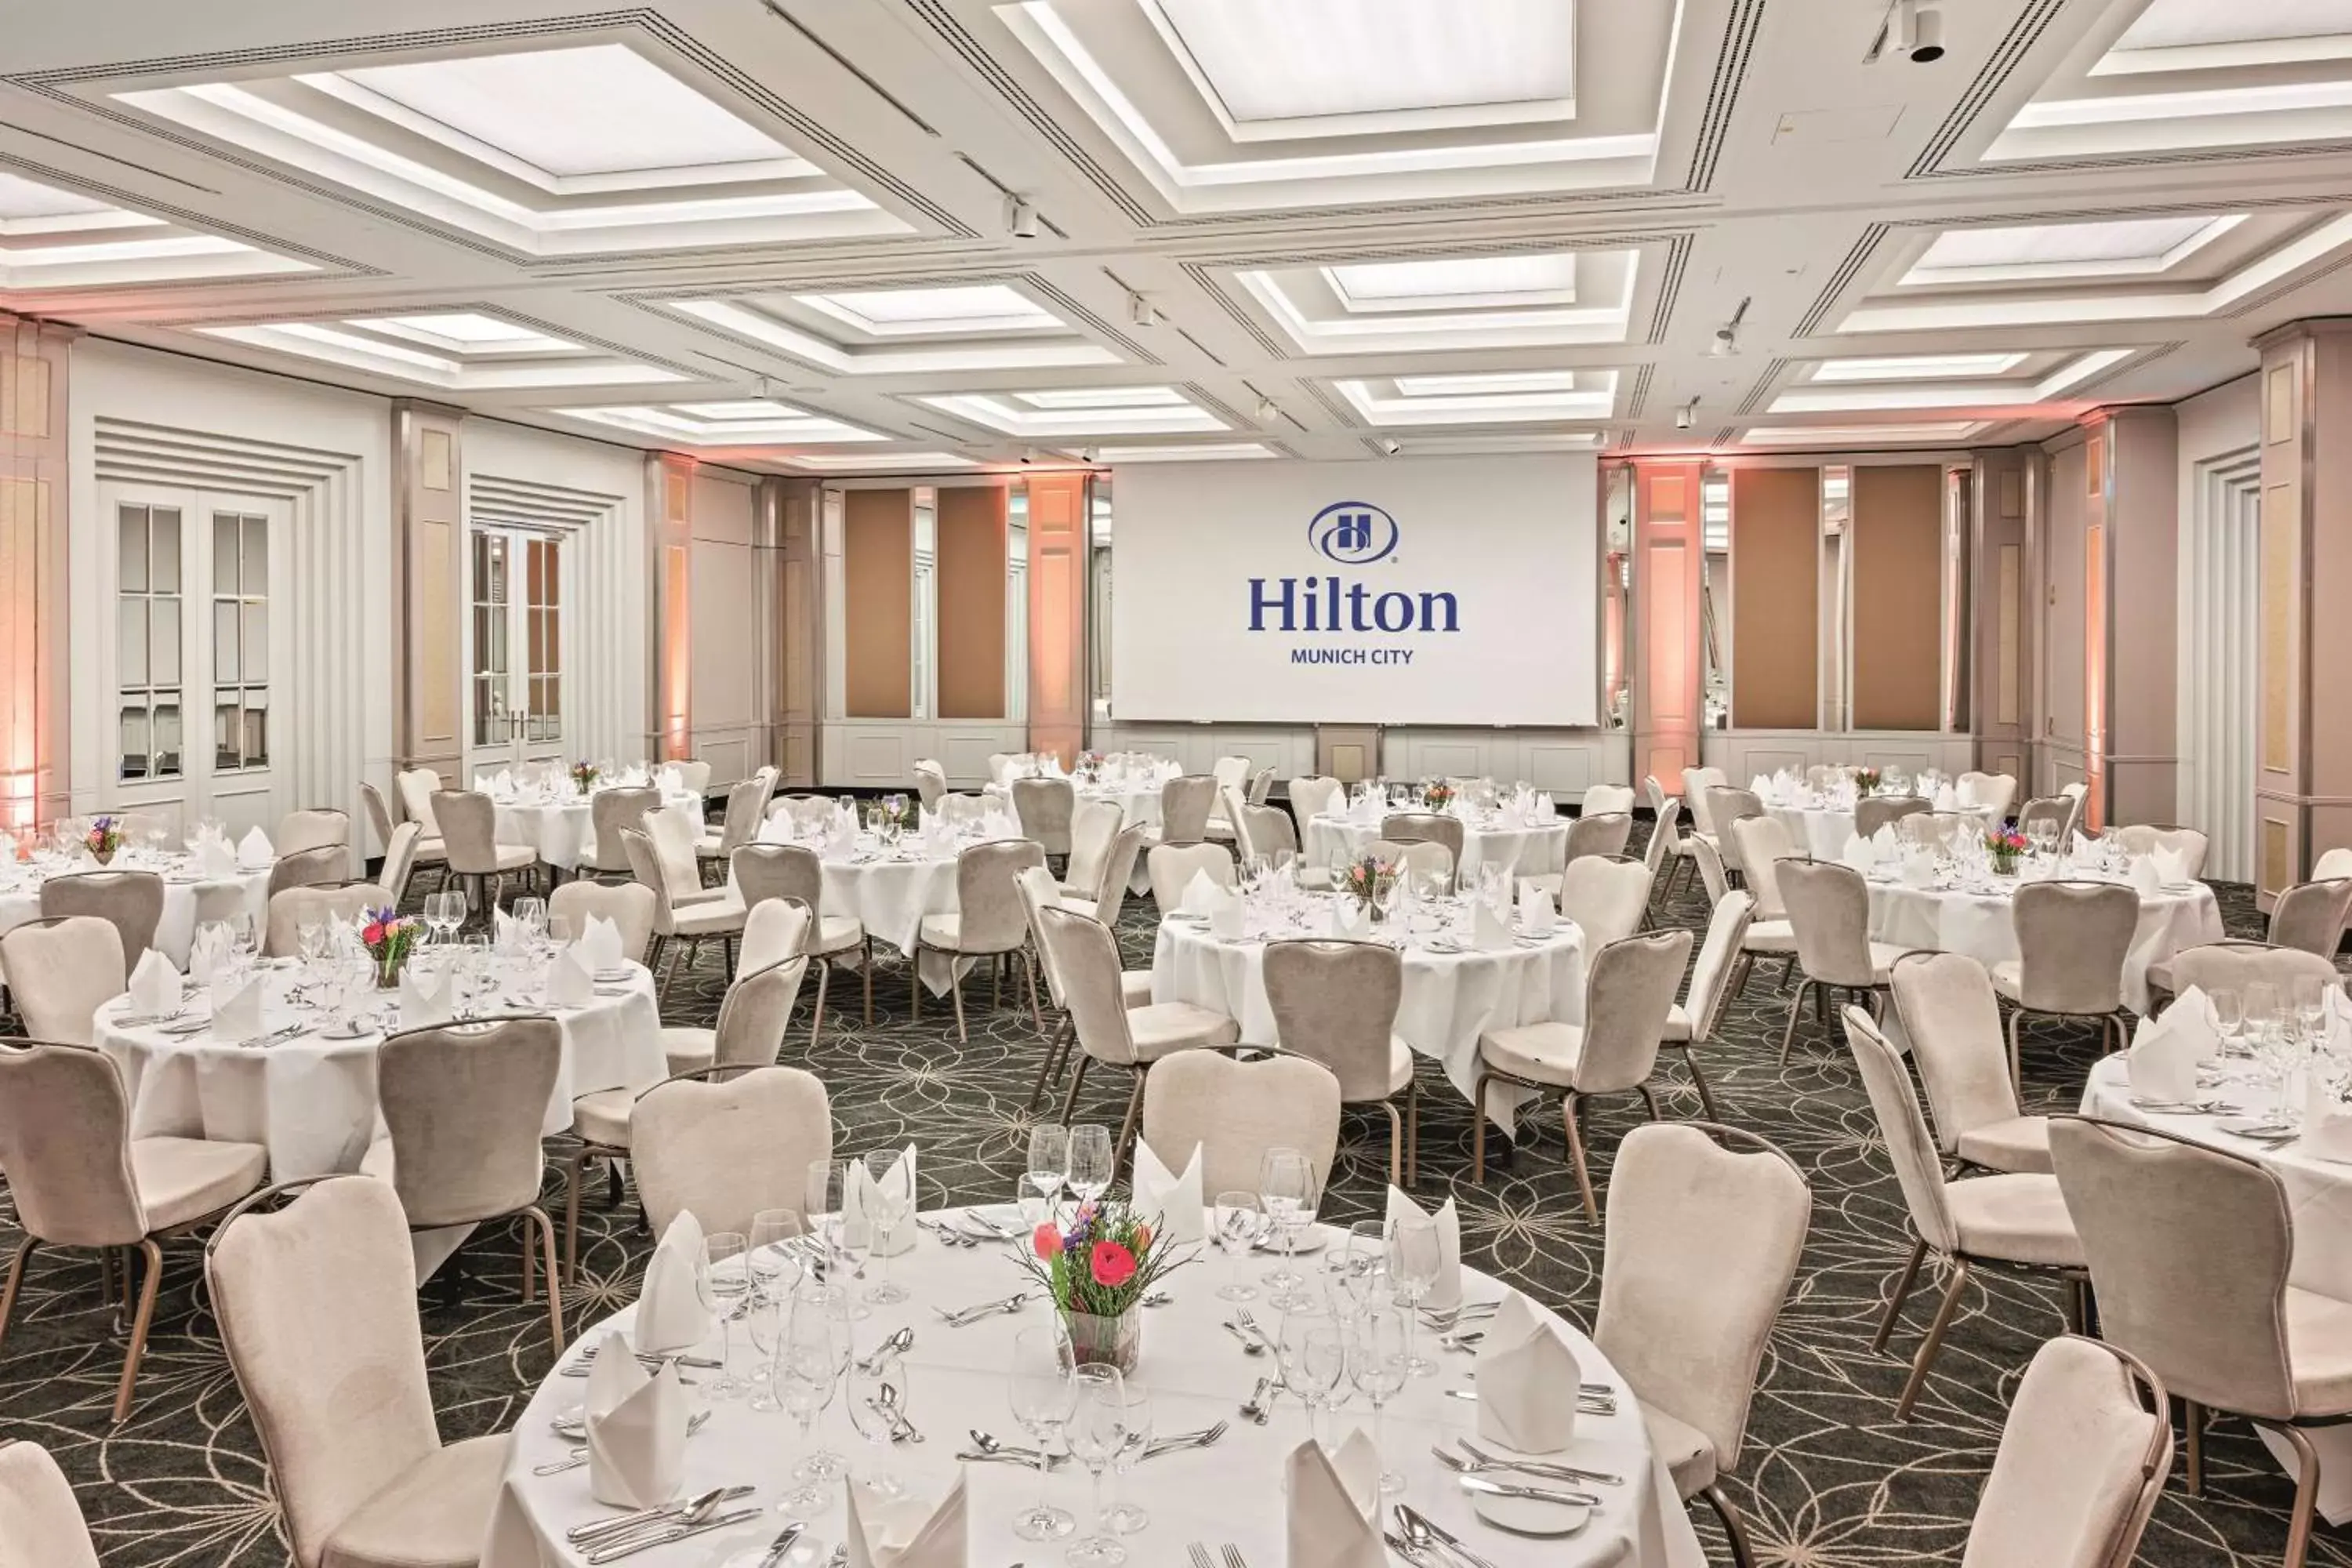 Meeting/conference room, Banquet Facilities in Hilton Munich City